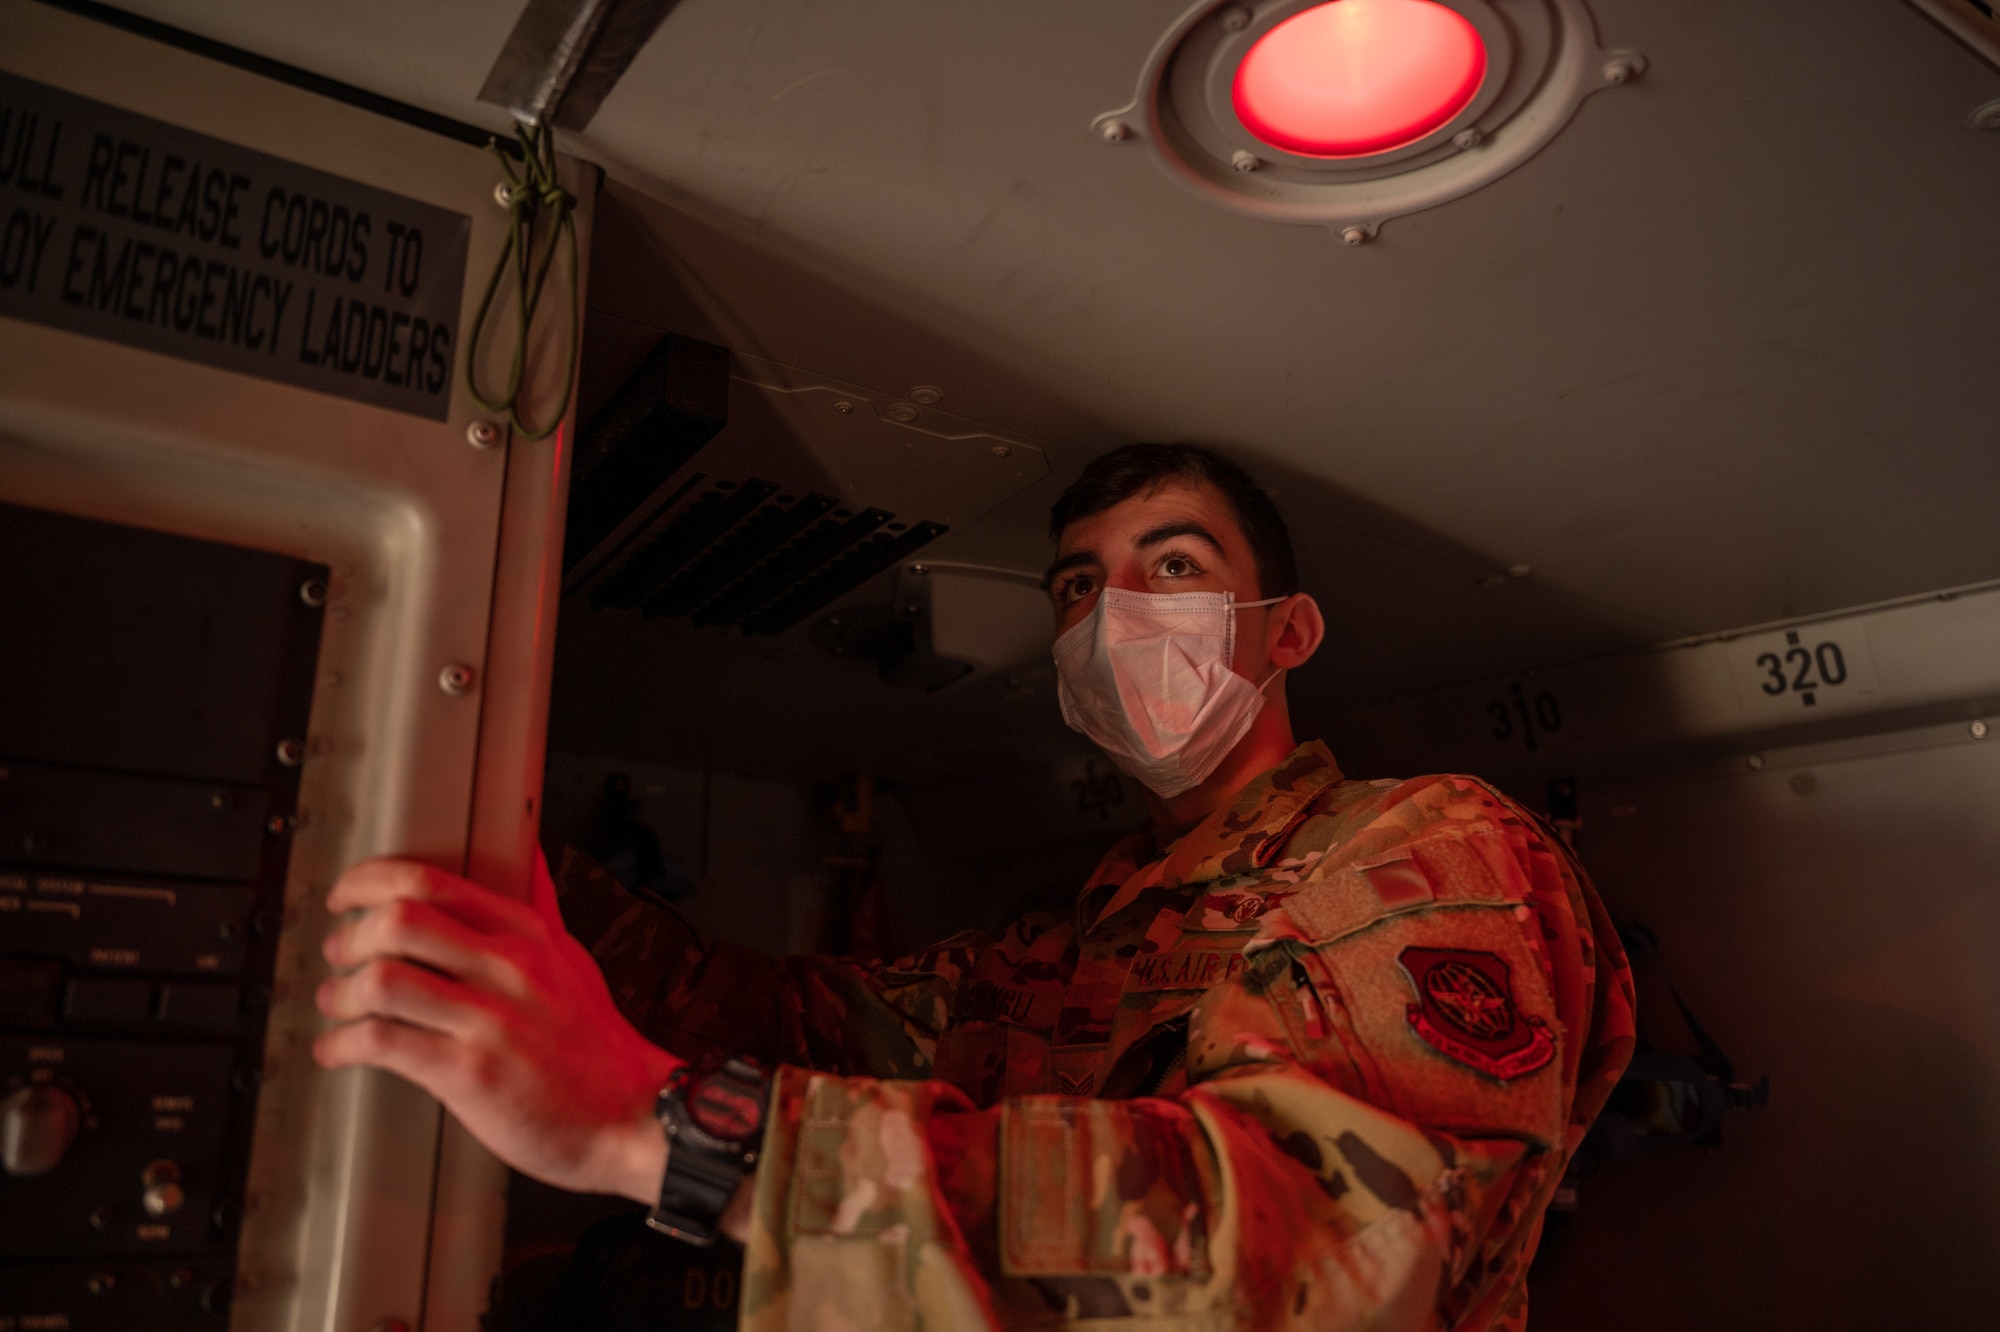 Senior Airman Jackson Pickrel tests emergency lights on a Dover Air Force Base C-17 Globemaster III before takeoff during exercise Mosaic Tiger at Moody AFB, Georgia, Feb. 25, 2021. Airmen from Dover AFB and Joint Base McGuire-Dix Lakehurst, New Jersey participated in the exercise, led by the 23rd Wing at Moody AFB, Georgia. The exercise tested agile combat employment  to build mission-essential skills to support the needs of Air Combat Command and Air Mobility Command. (U.S. Air Force photo by Airman 1st Class Faith Schaefer)